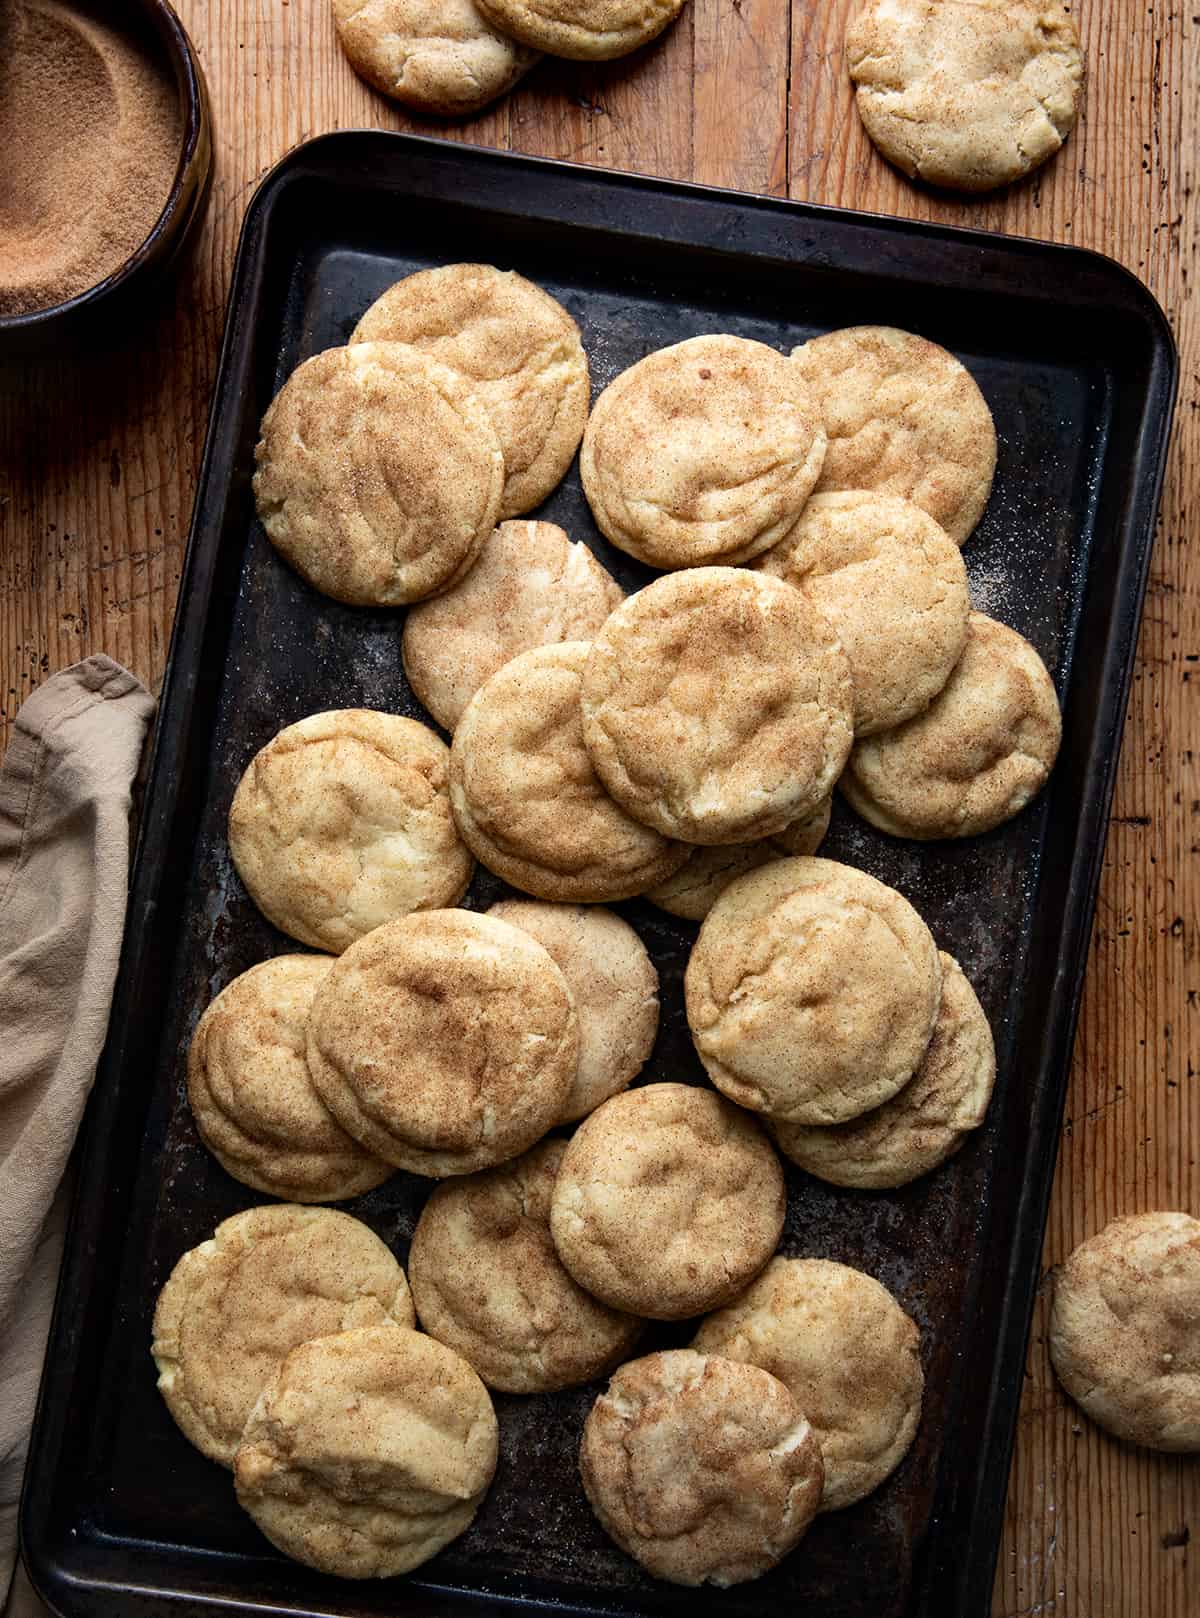 Pan of Browned Butter Snickerdoodles on a Table.